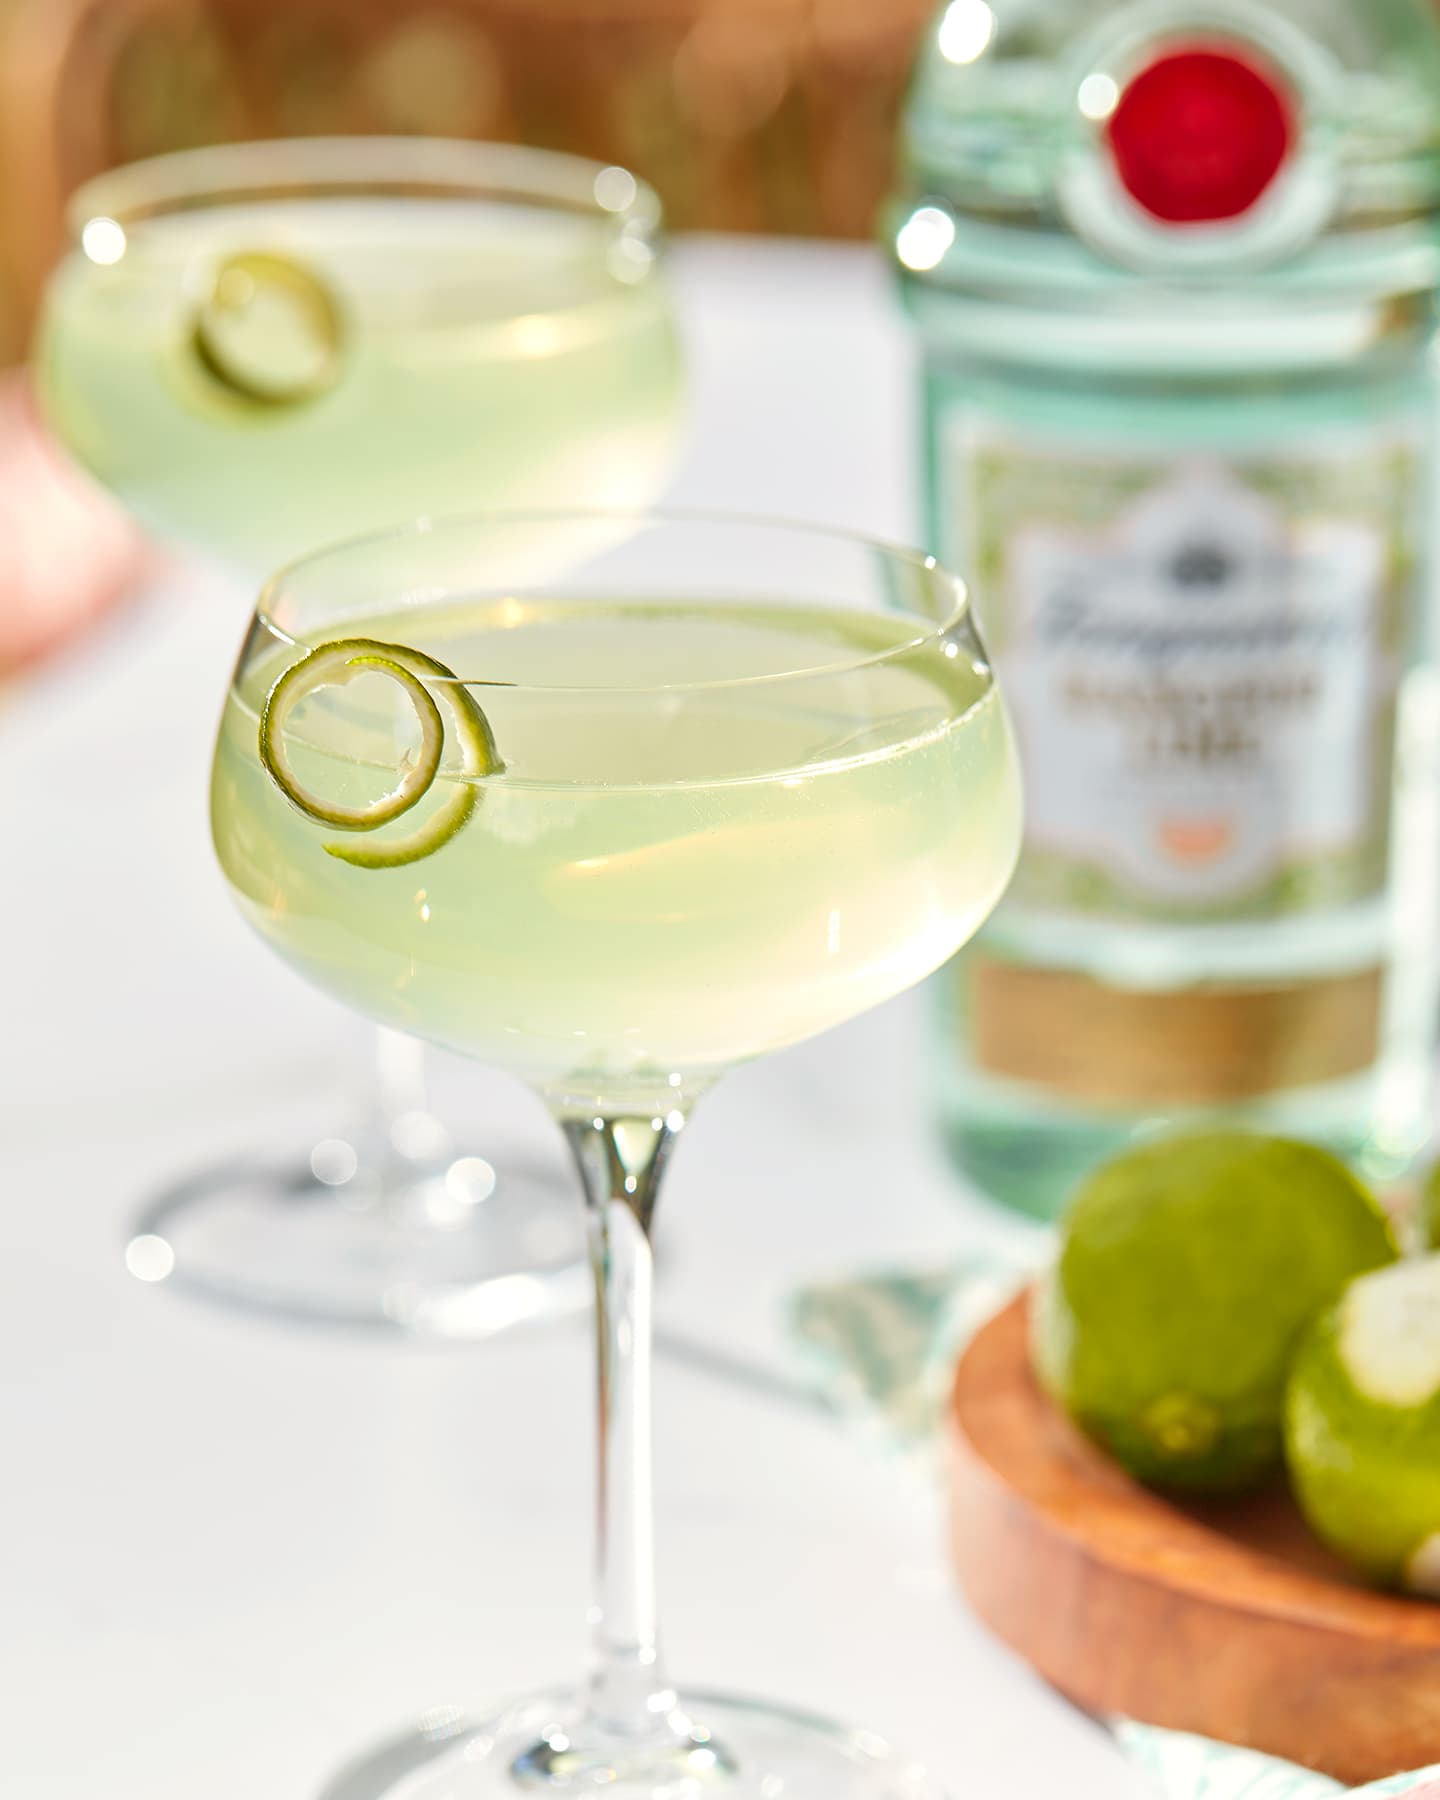 A light green Tanqueray Rangpur Gimlet cocktail in a glass garnished with a lime swirl.